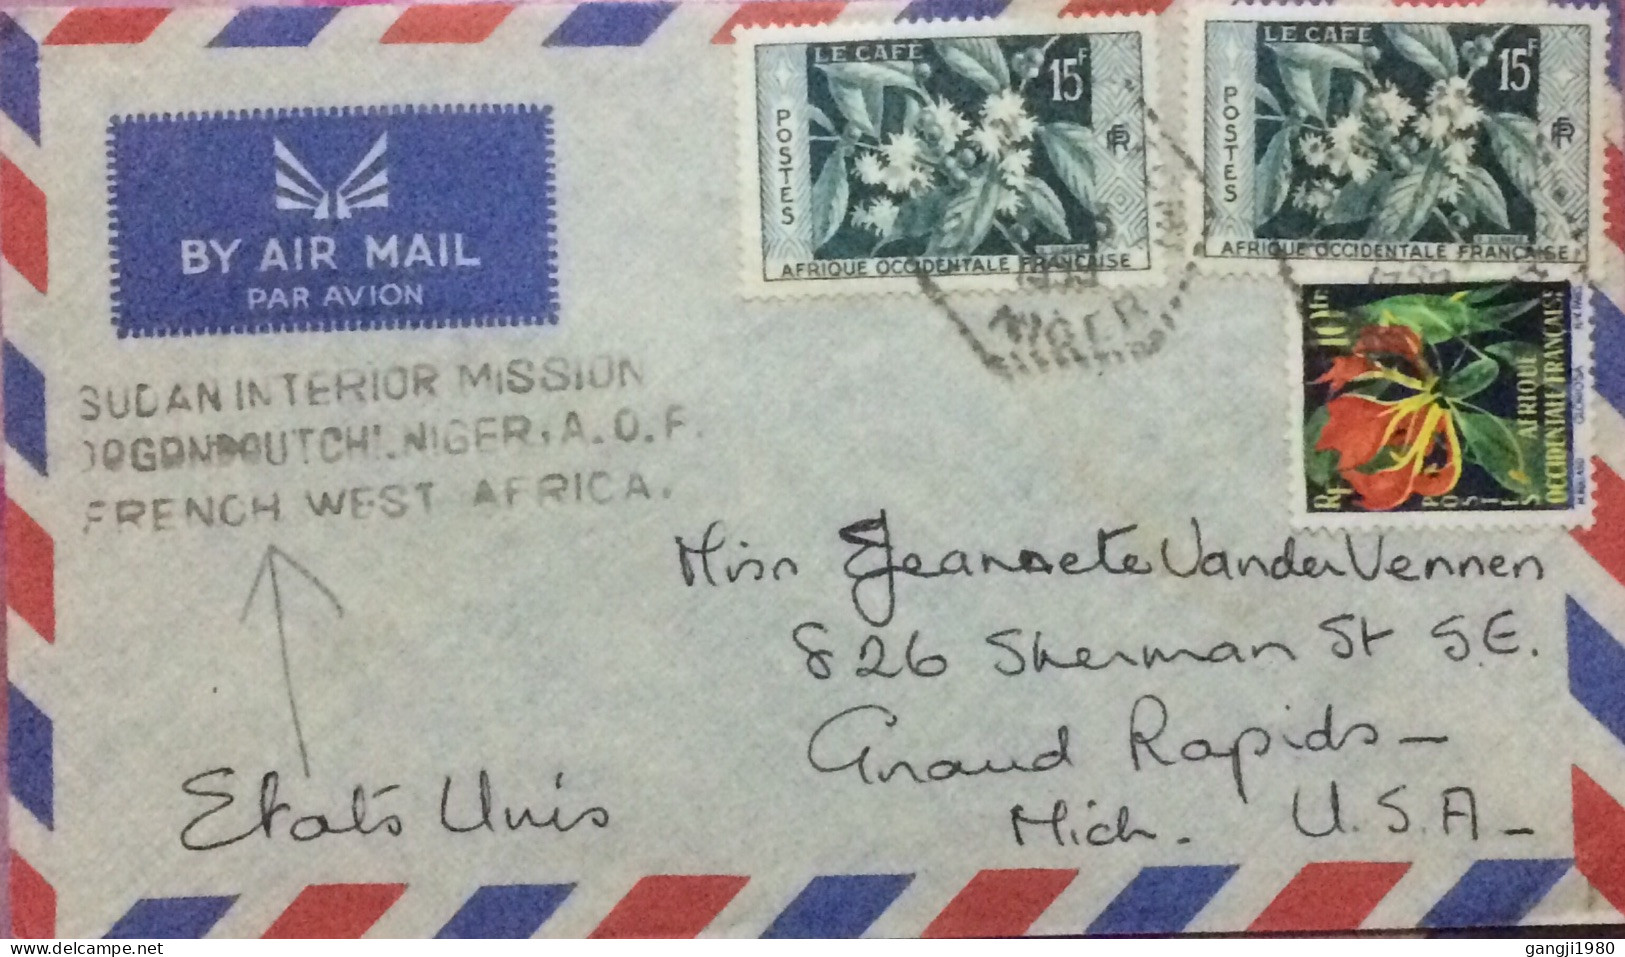 FRECH NIGER (FRENCH WEST AFRICA) 1958, COVER USED TO USA, SUDAN INTERIOR MISSION, DOGONDOUTCHI, A.O.F., 3 FLOWER STAMP. - Covers & Documents